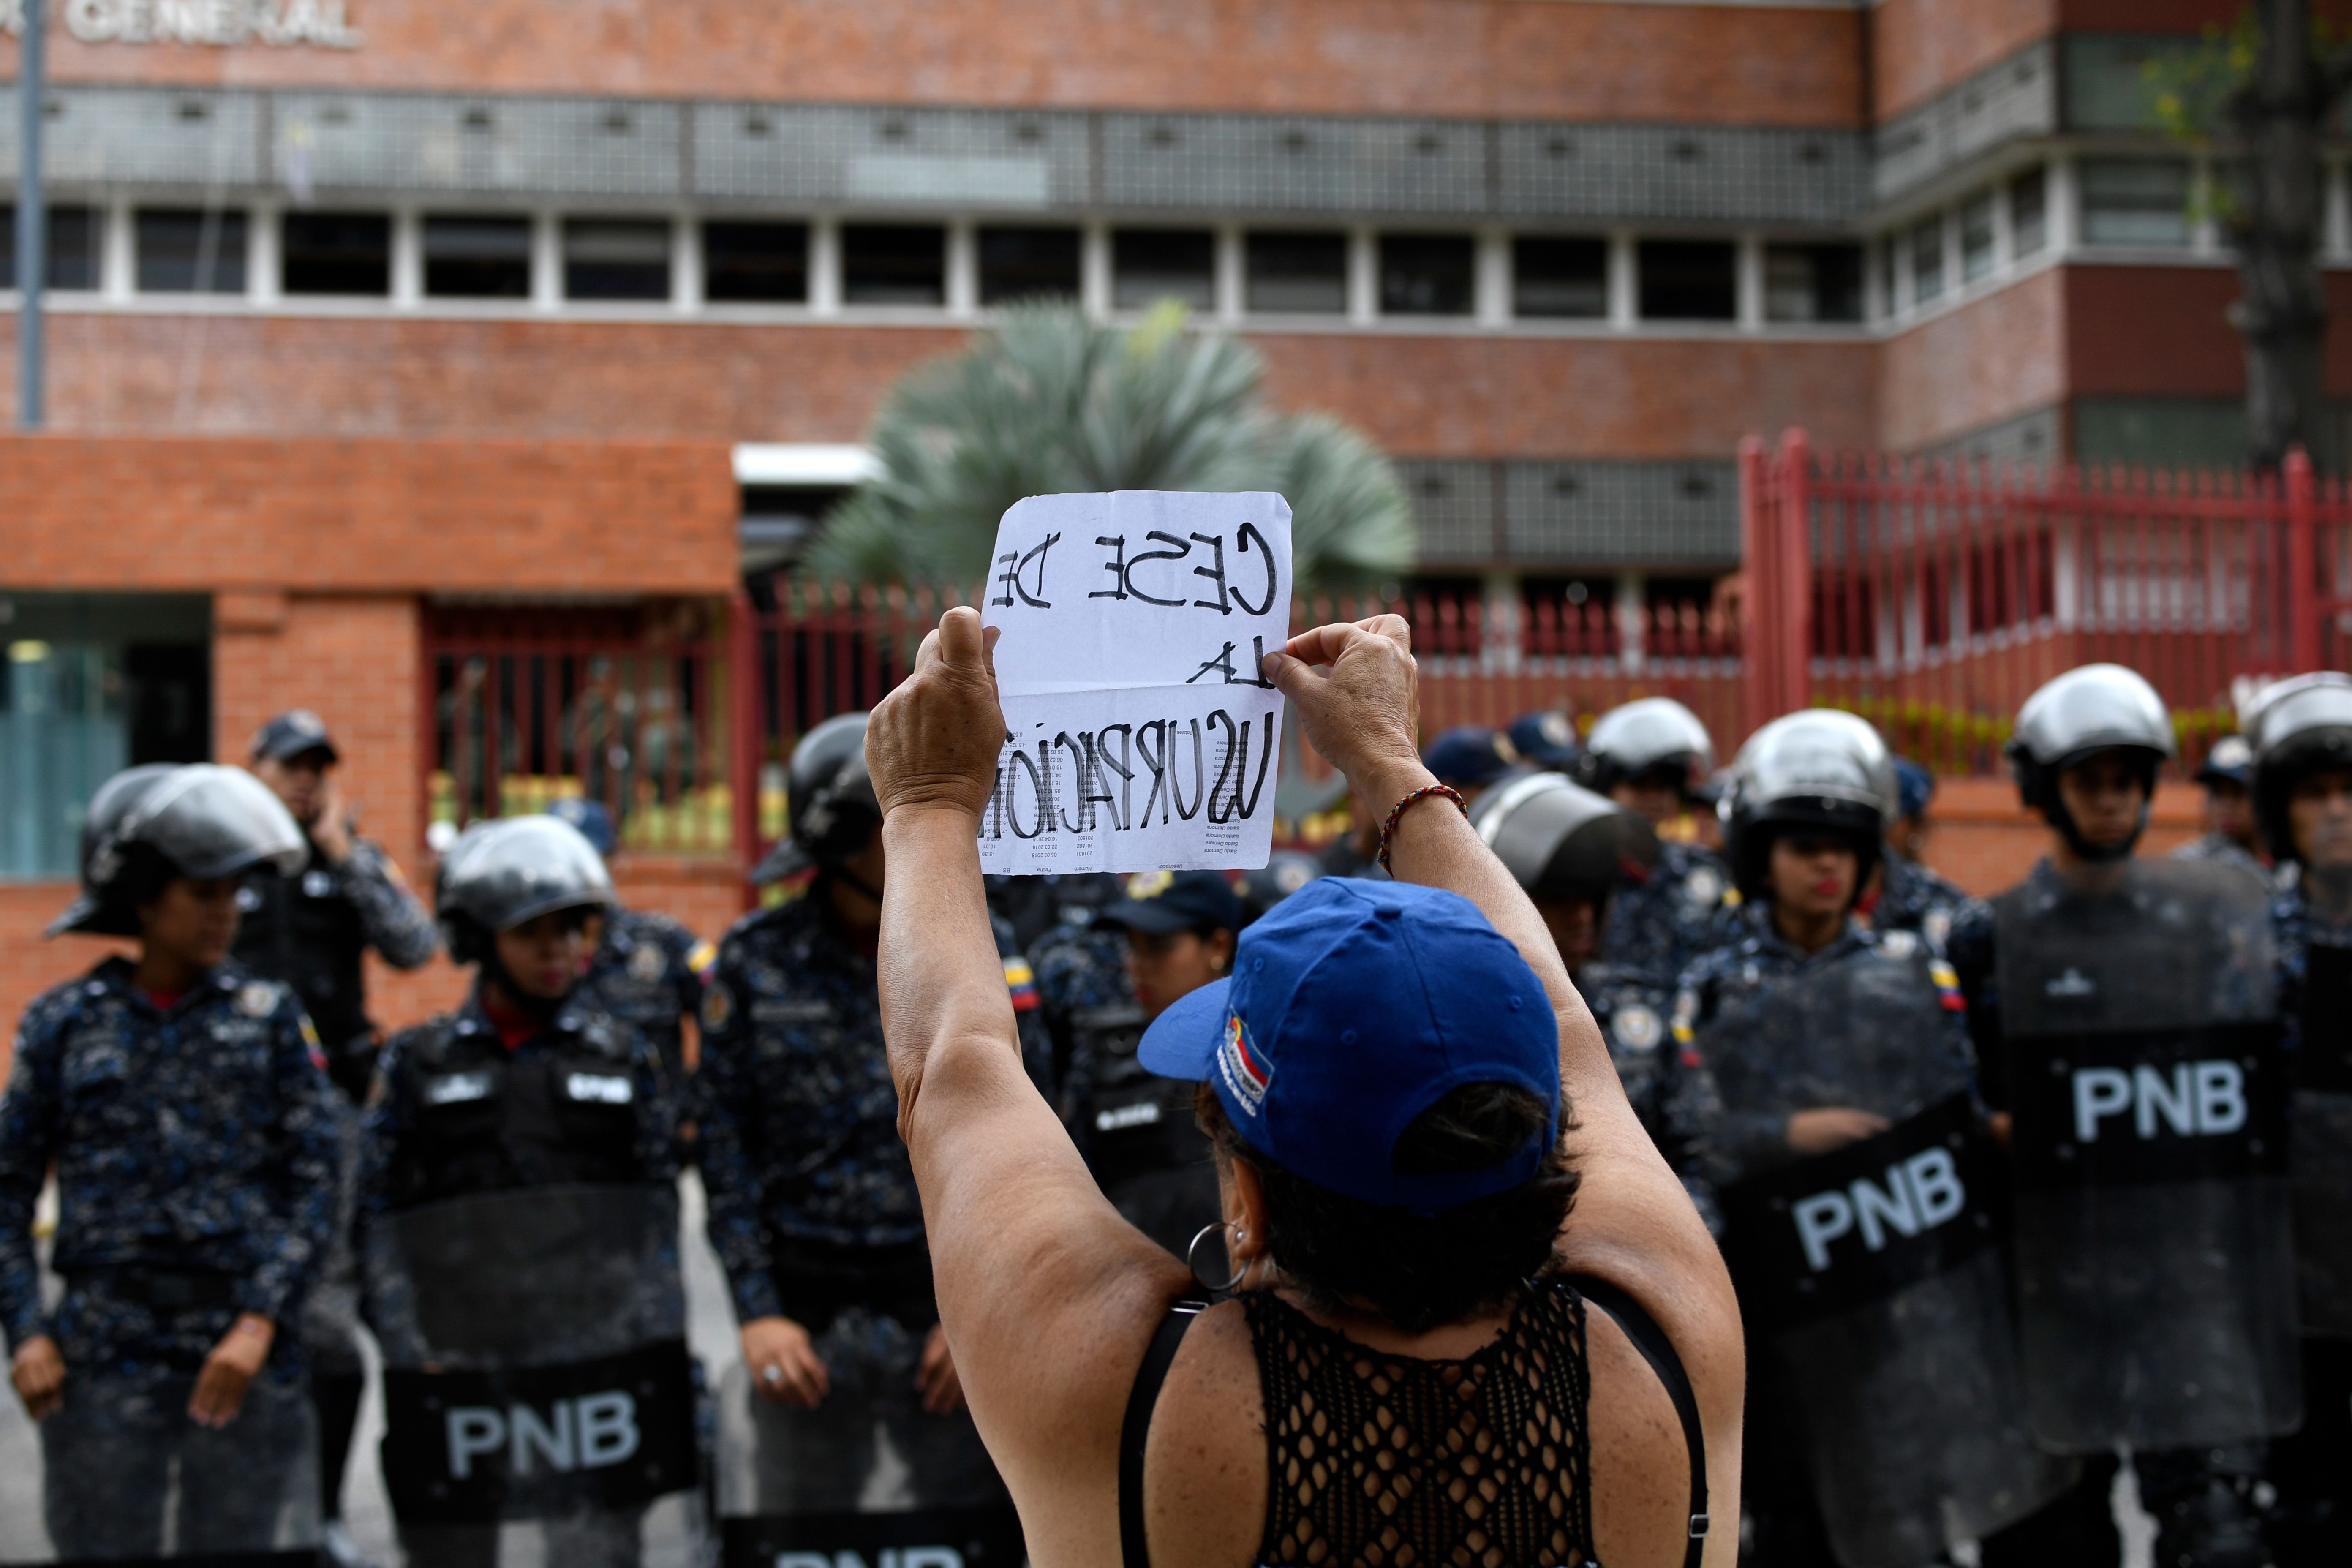 A woman demonstrates with a sign reading "End of usurpation", in front of a line of riot police outside the Venezuelan Navy command headquarters at San Bernardino neighborhood in Caracas on May 4, 2019. - Venezuelan President Nicolas Maduro called on the armed forces to be "ready" in the event of a US military offensive against the South American country, in a speech to troops on Saturday. His speech at a military base came as opposition leader Juan Guaido rallied his supporters in a new day of protests to press the armed forces to support his bid to dislodge Maduro. (JUAN BARRETO/AFP via Getty Images)